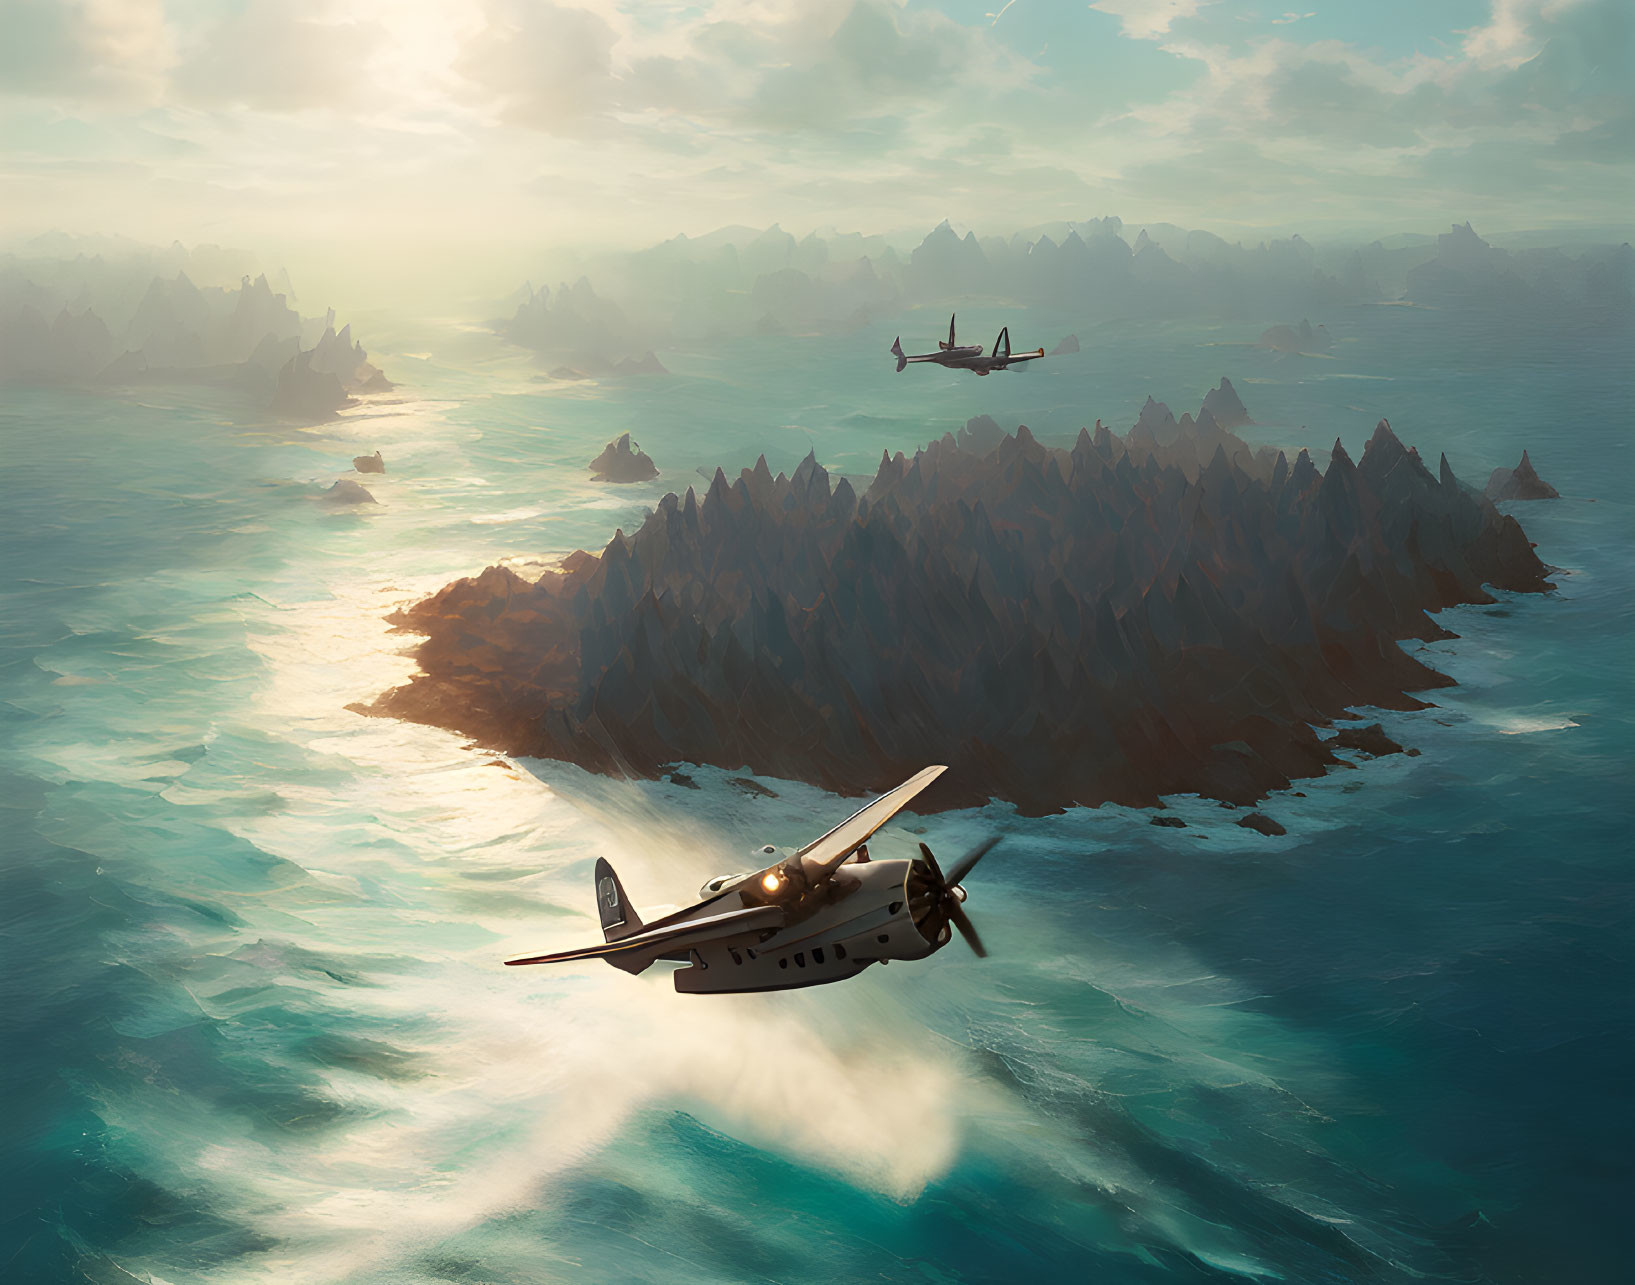 Vintage planes flying over sunlit sea with jagged rock formations.